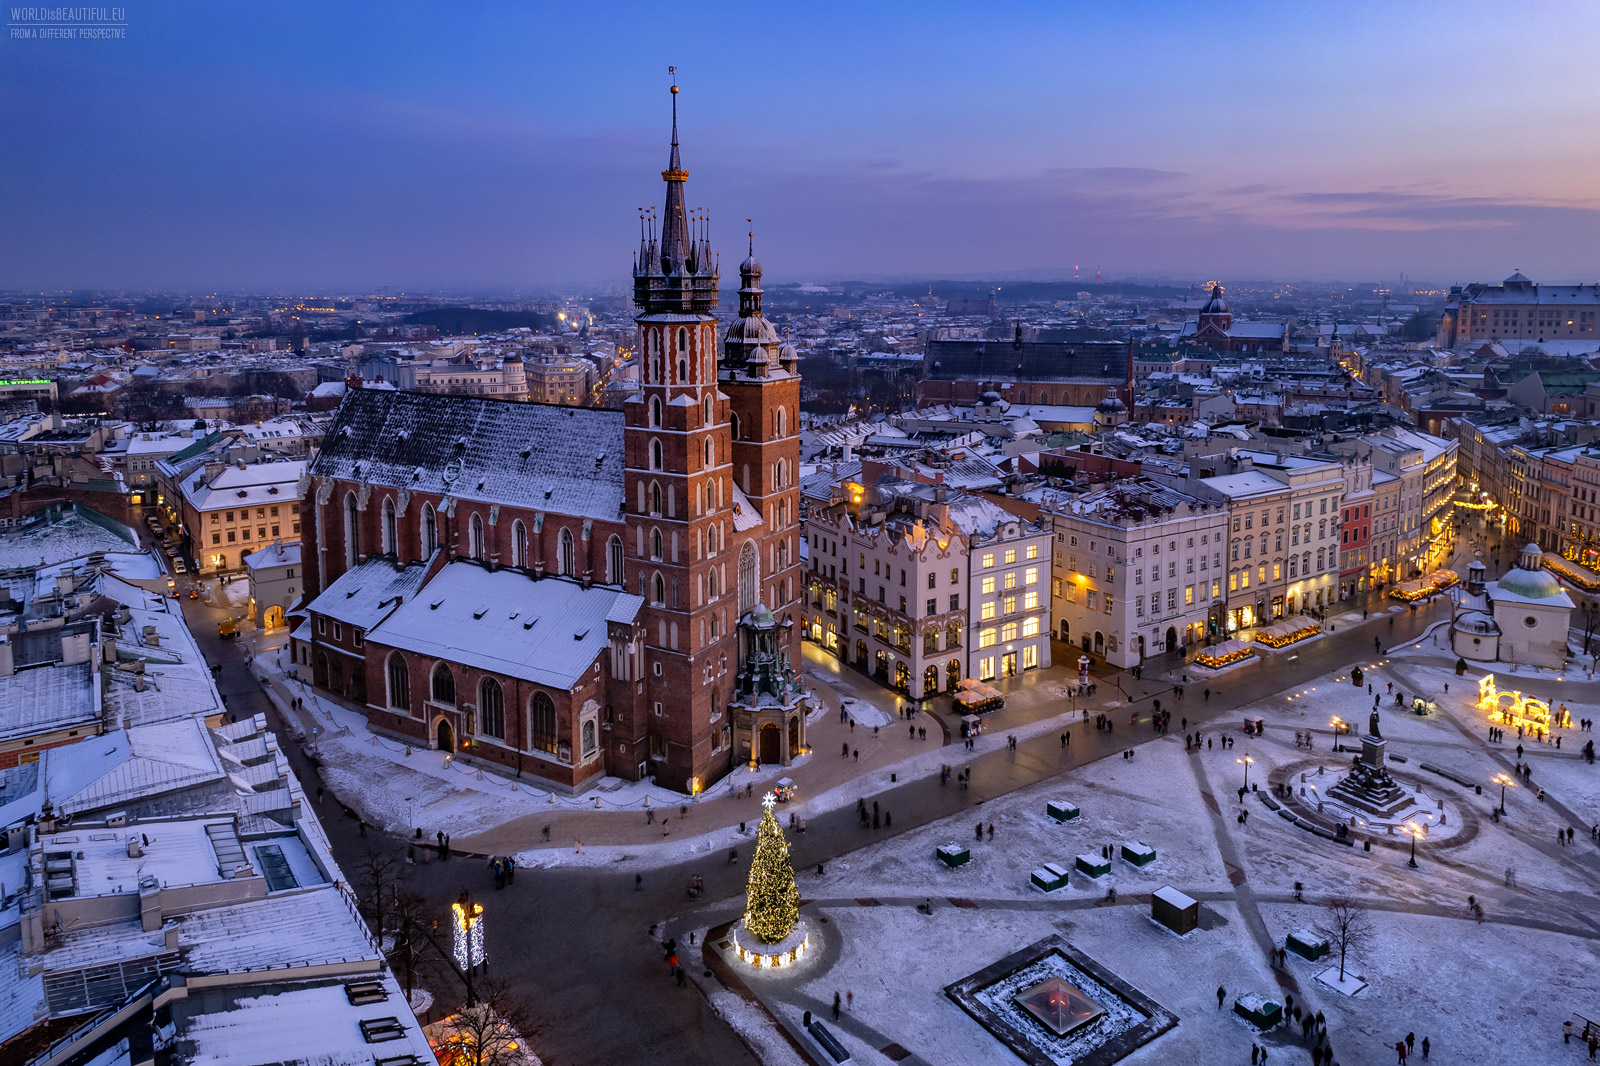 Krakow from a Drone's Perspective